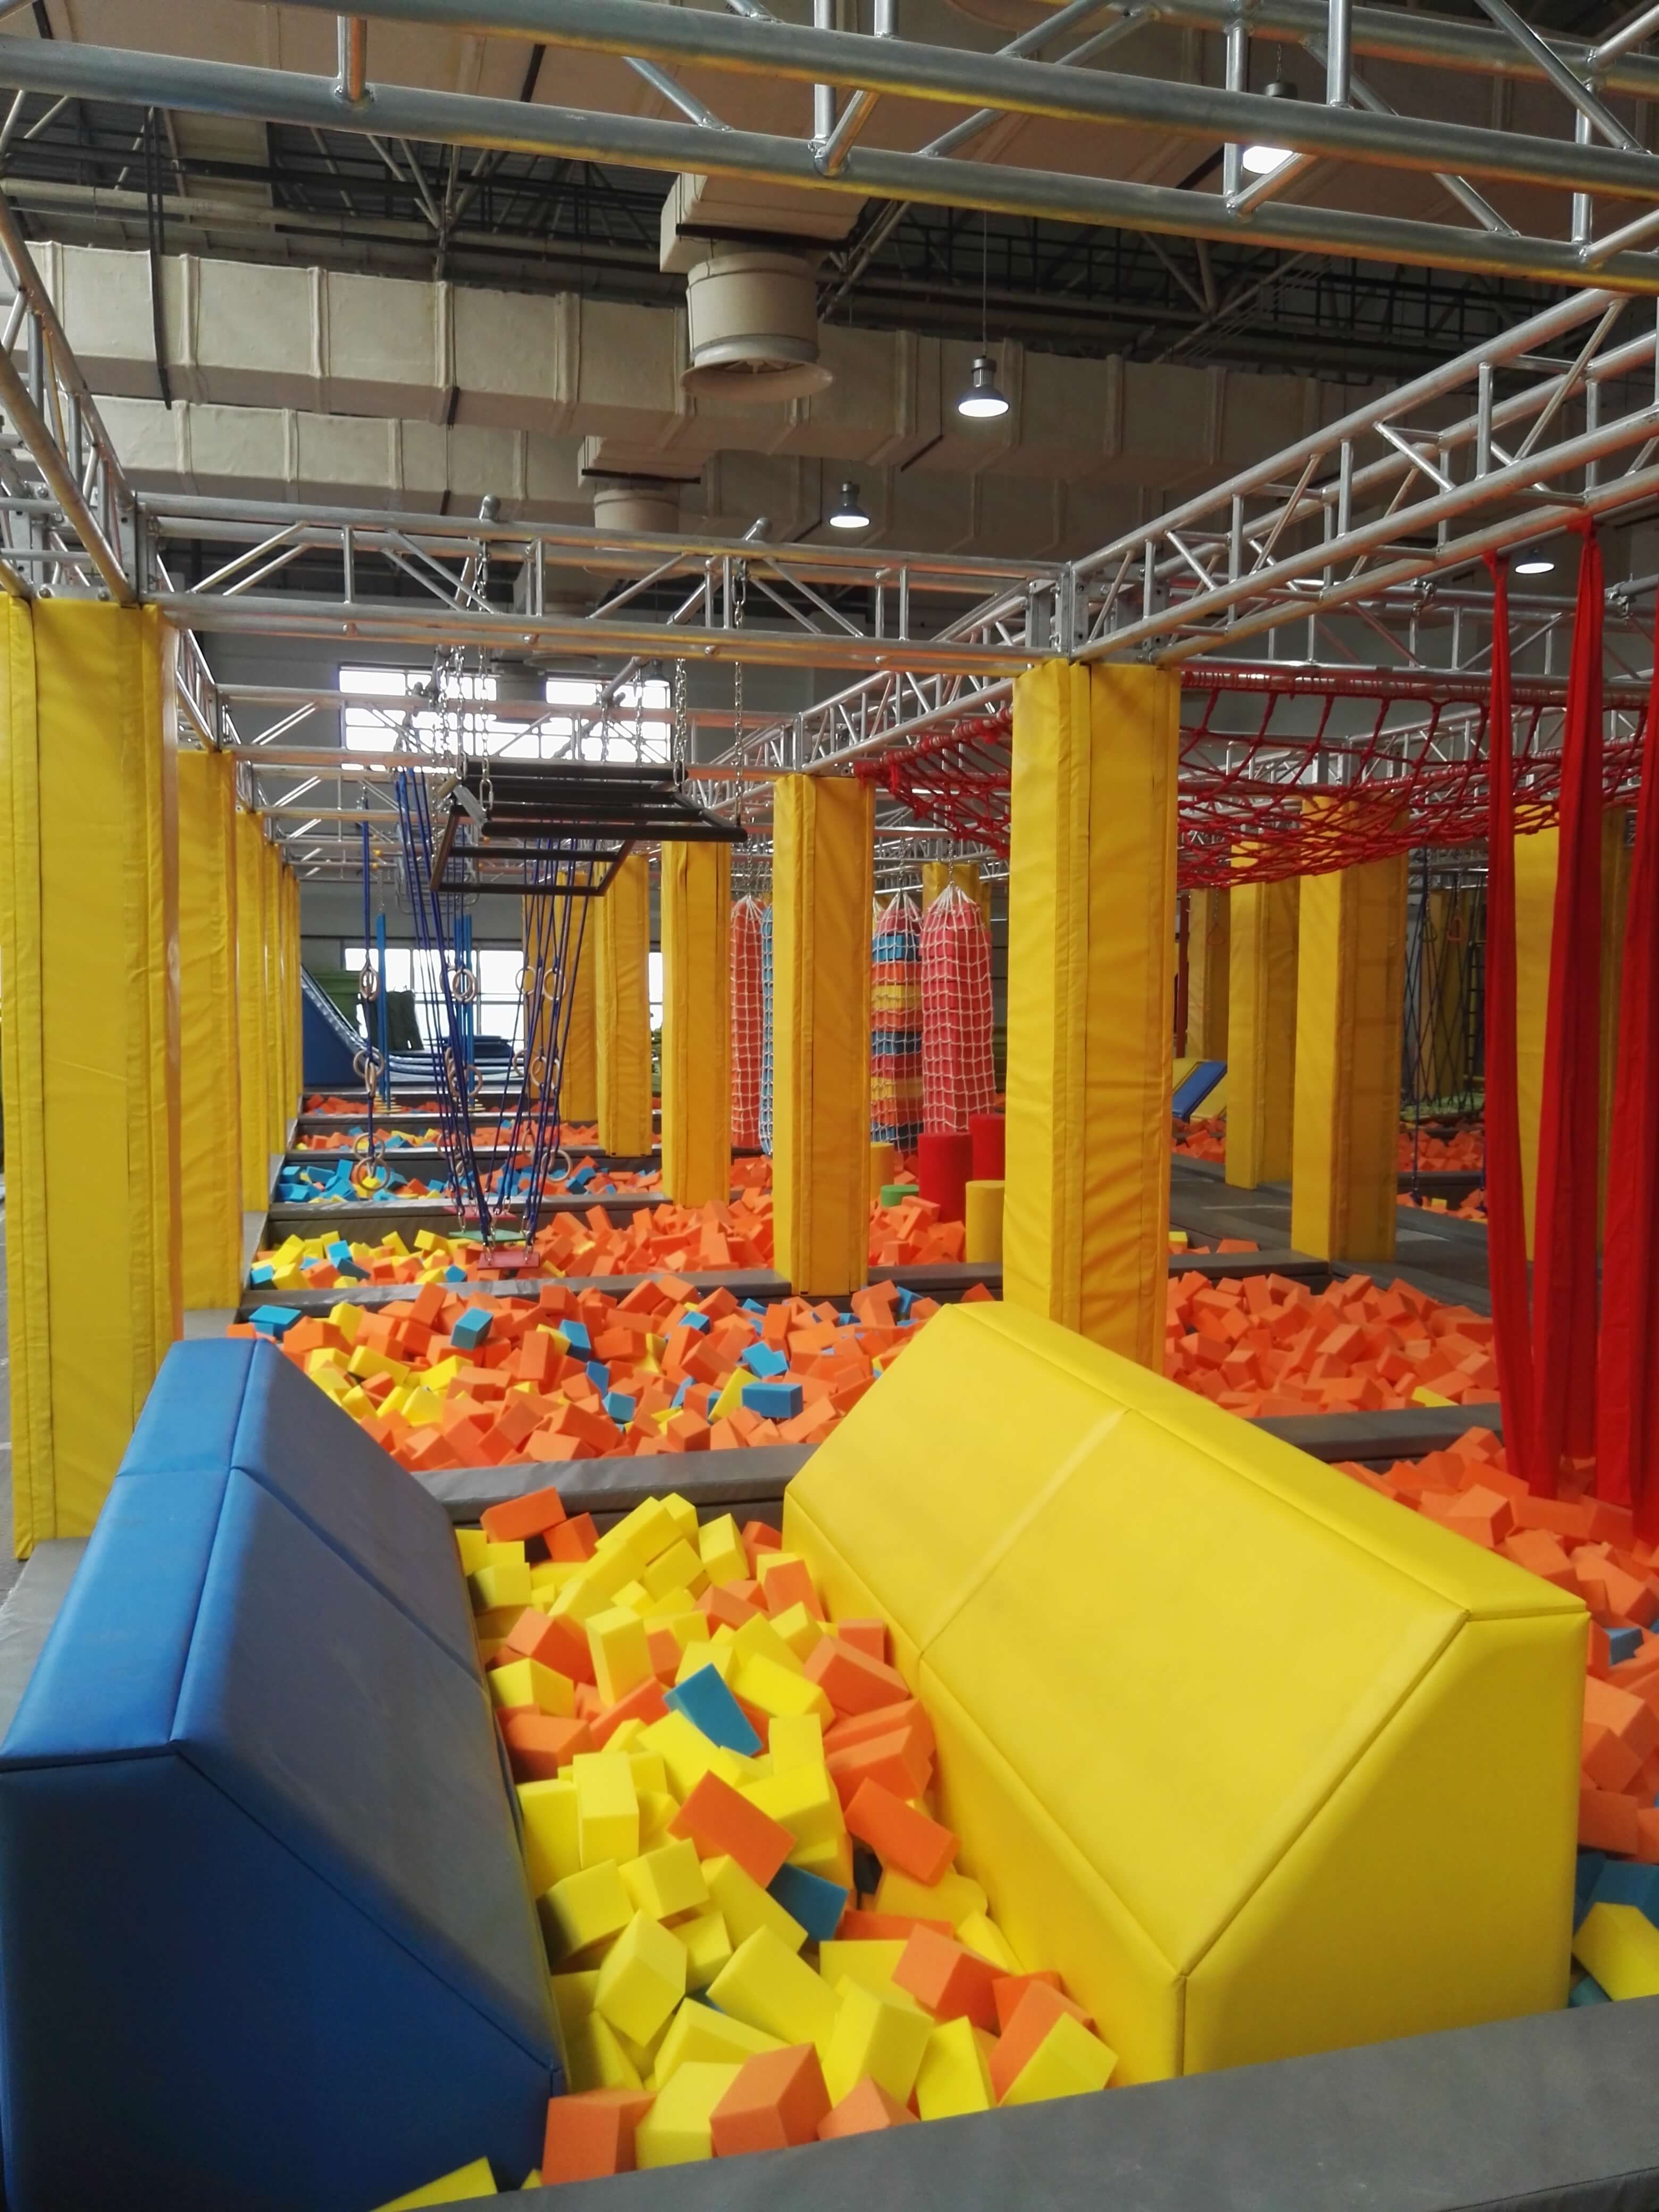 What is the most dangerous equipment in an indoor playground?